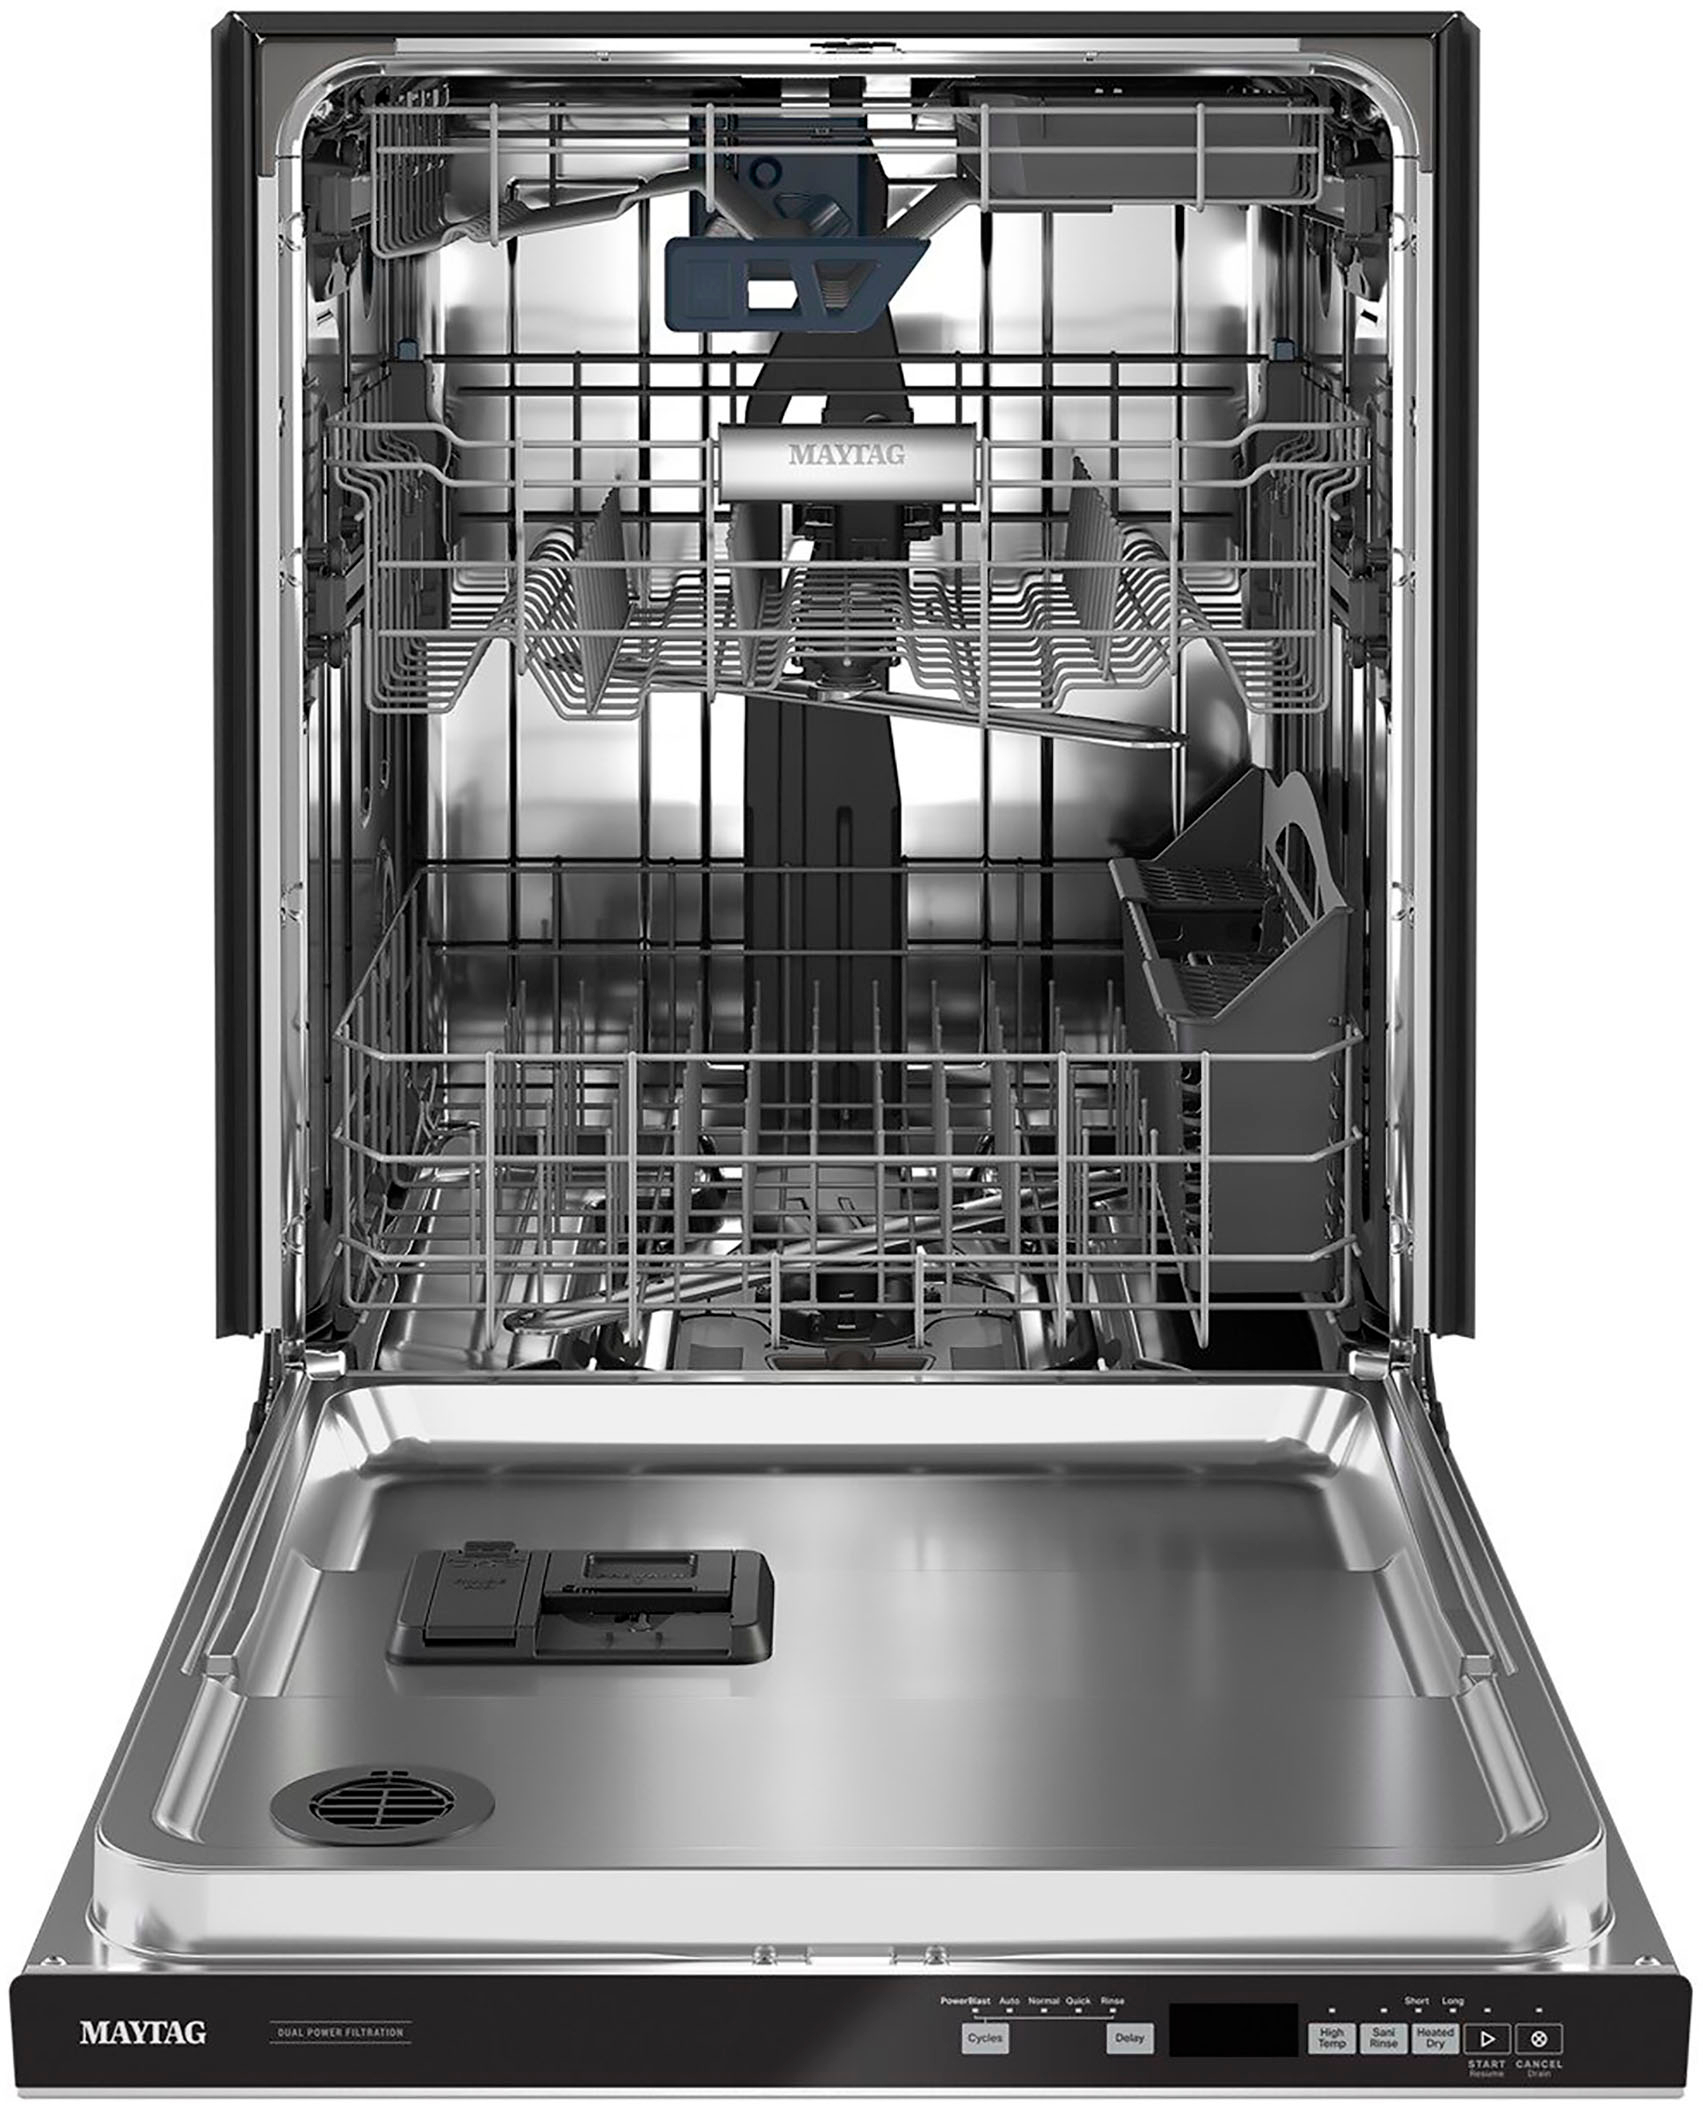 Maytag Top Control Built-In Dishwasher with Stainless Steel Tub 